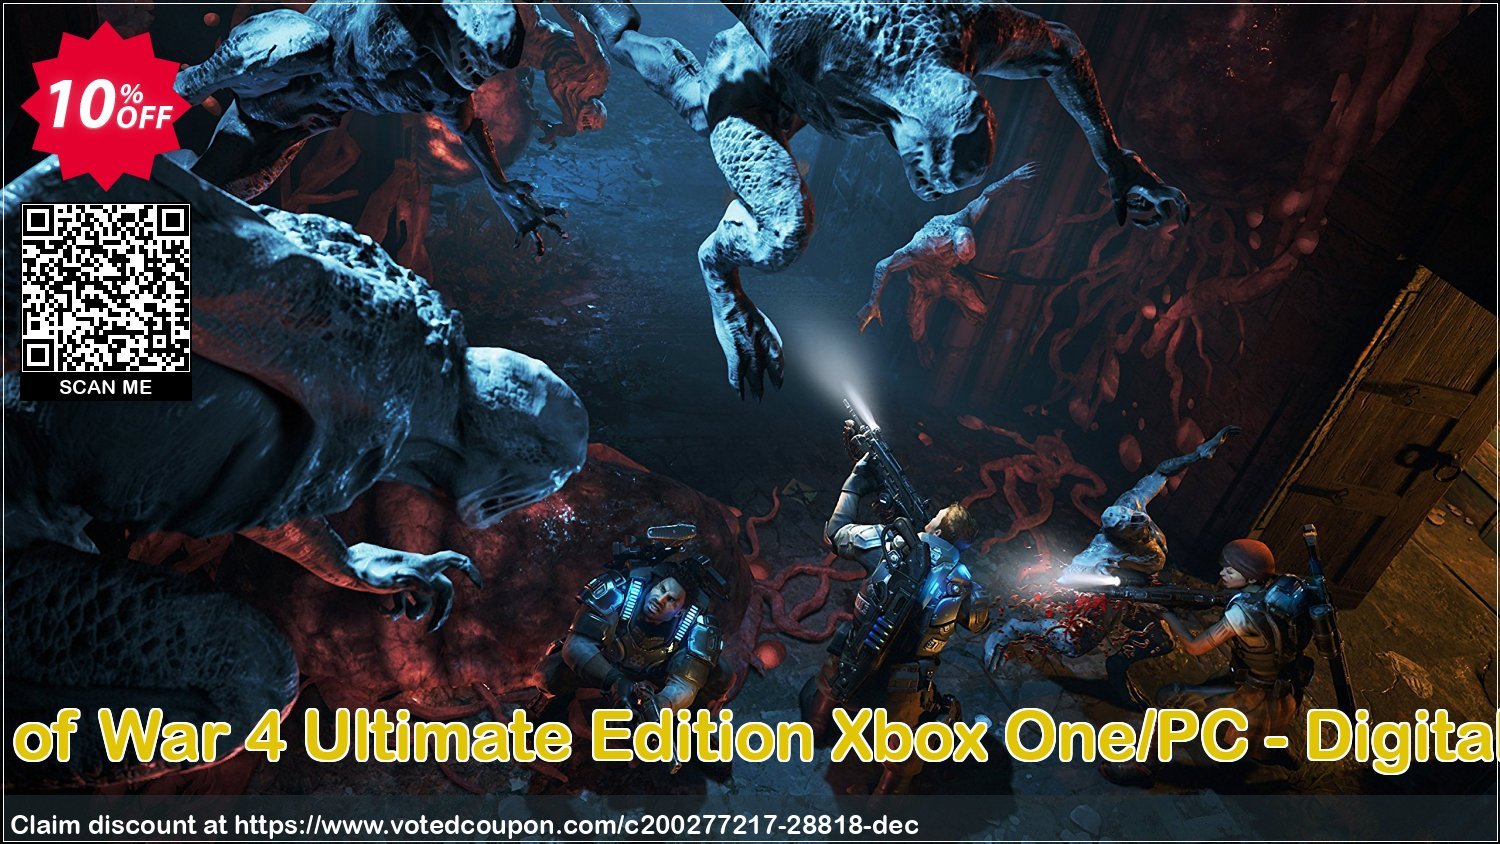 Gears of War 4 Ultimate Edition Xbox One/PC - Digital Code Coupon Code Apr 2024, 10% OFF - VotedCoupon